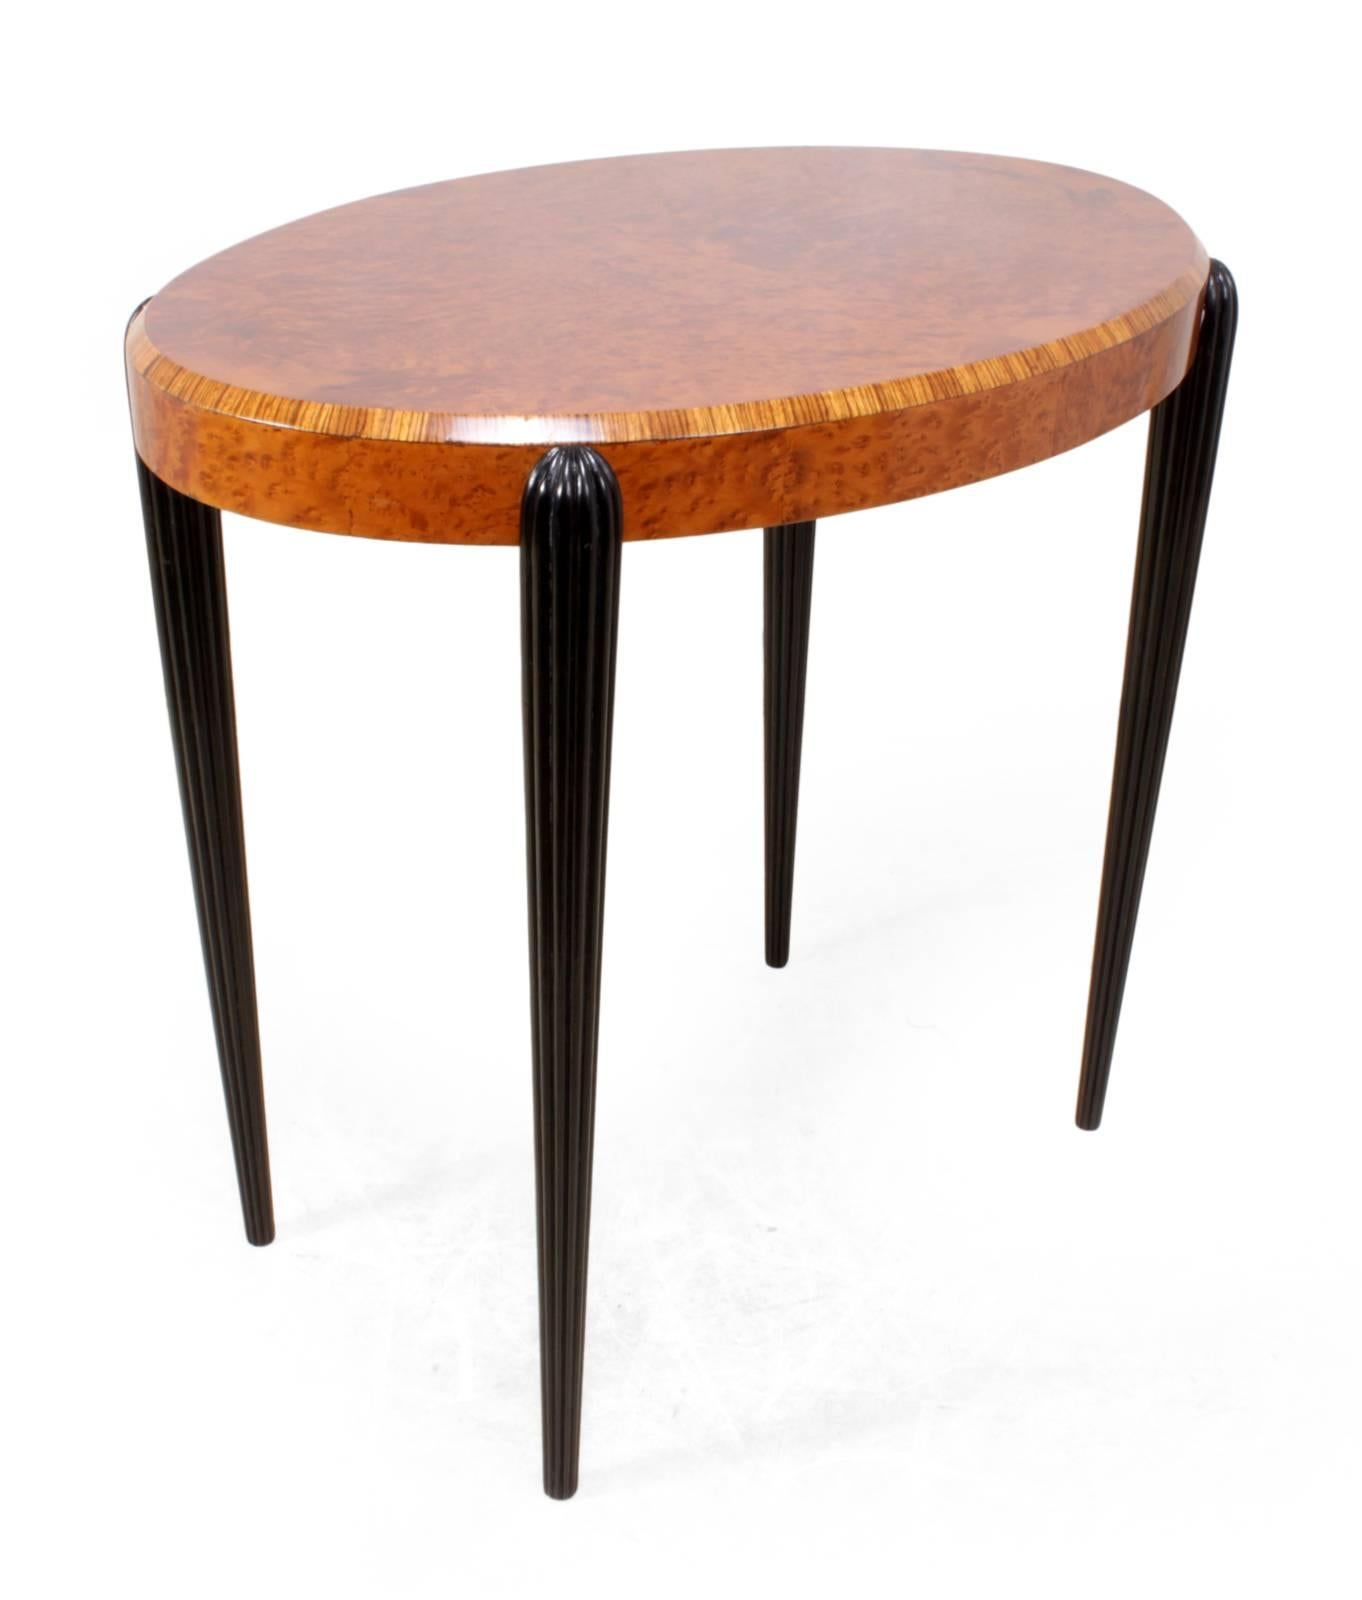 Early 20th Century Art Deco Side Table in the Style of Rhulman